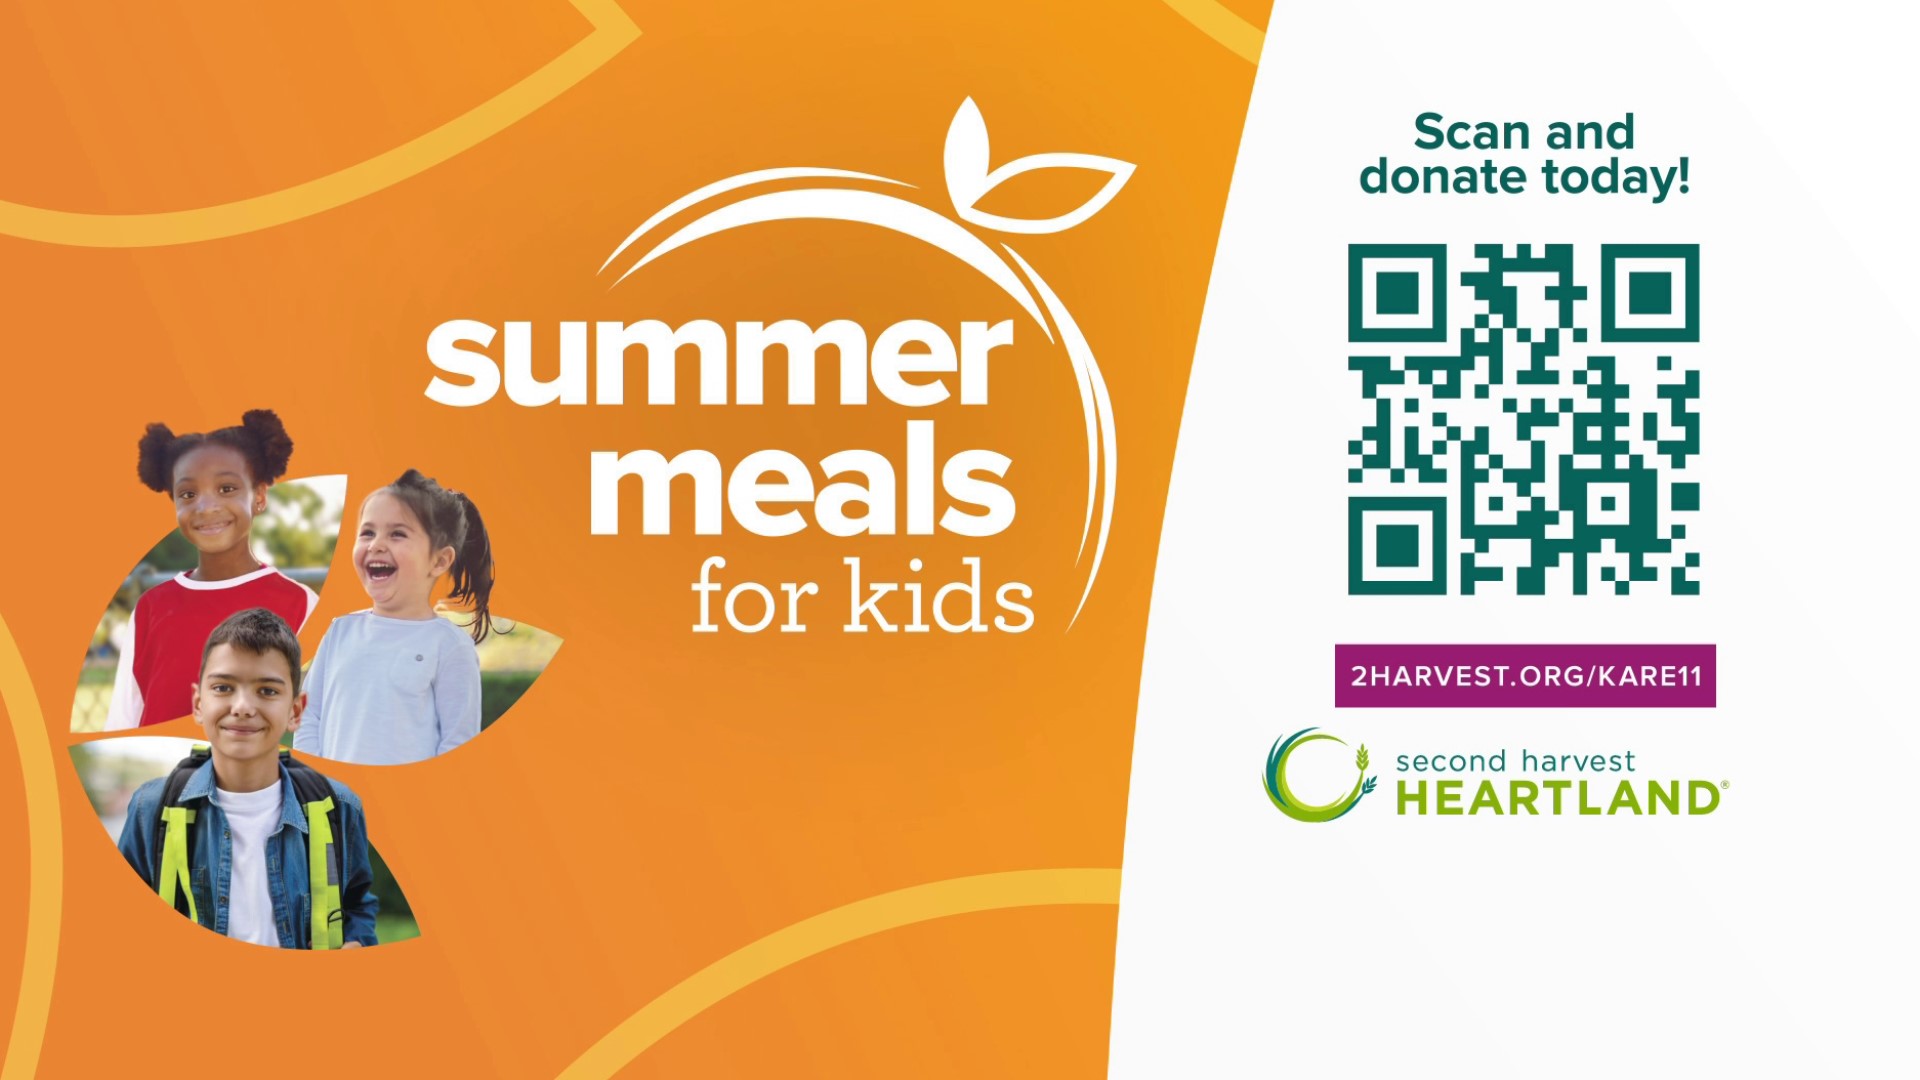 The Open Door Pantry and Second Harvest Heartland have partnered with KARE 11 for the Summer Meals for Kids program.